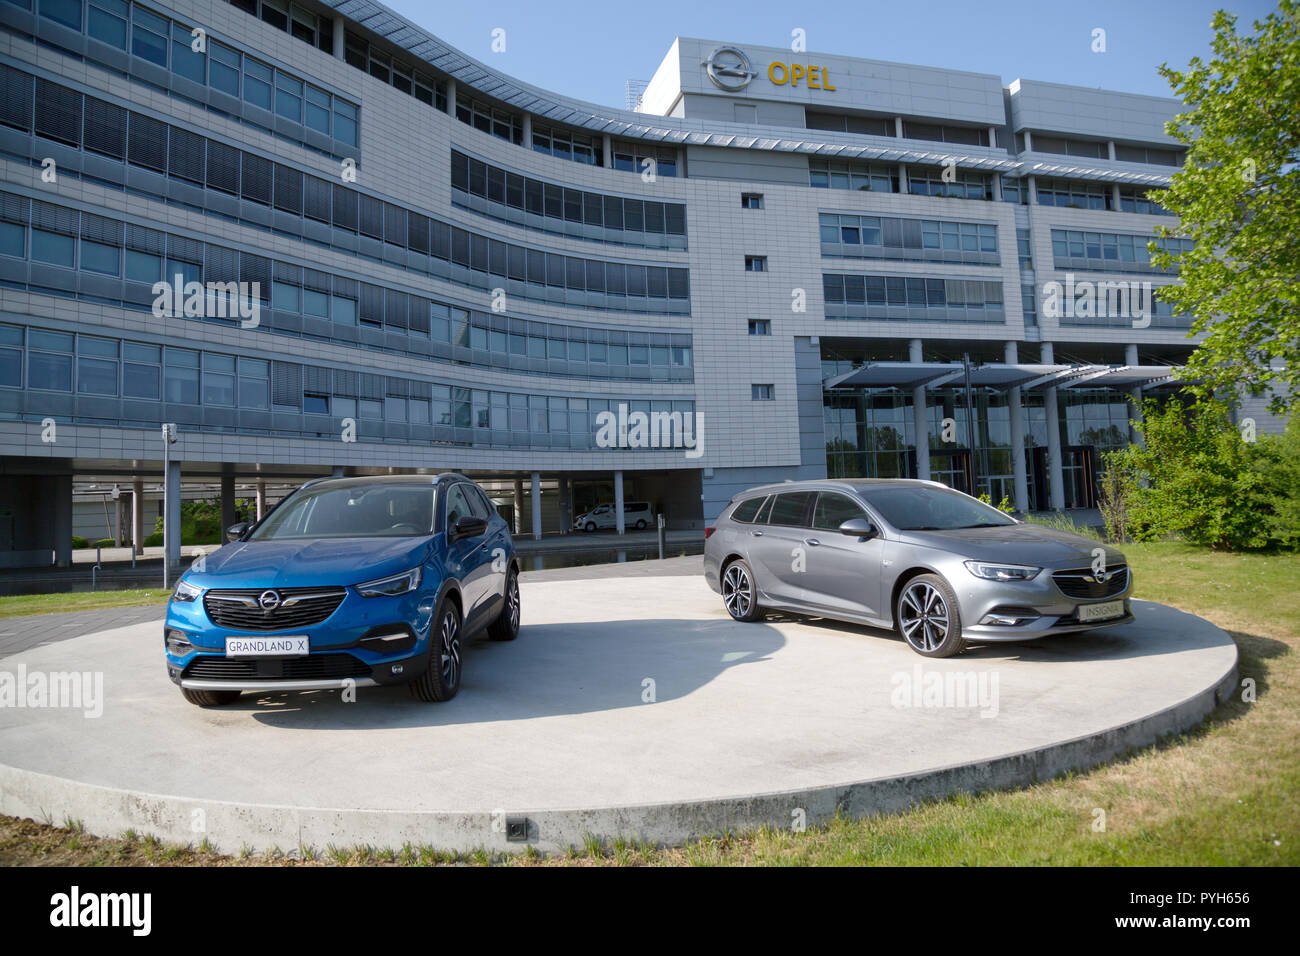 Germany, Ruesselsheim, Opel Automobile GmbH: Opel Grandland X and Opel Insignia in front of the group headquarters Stock Photo